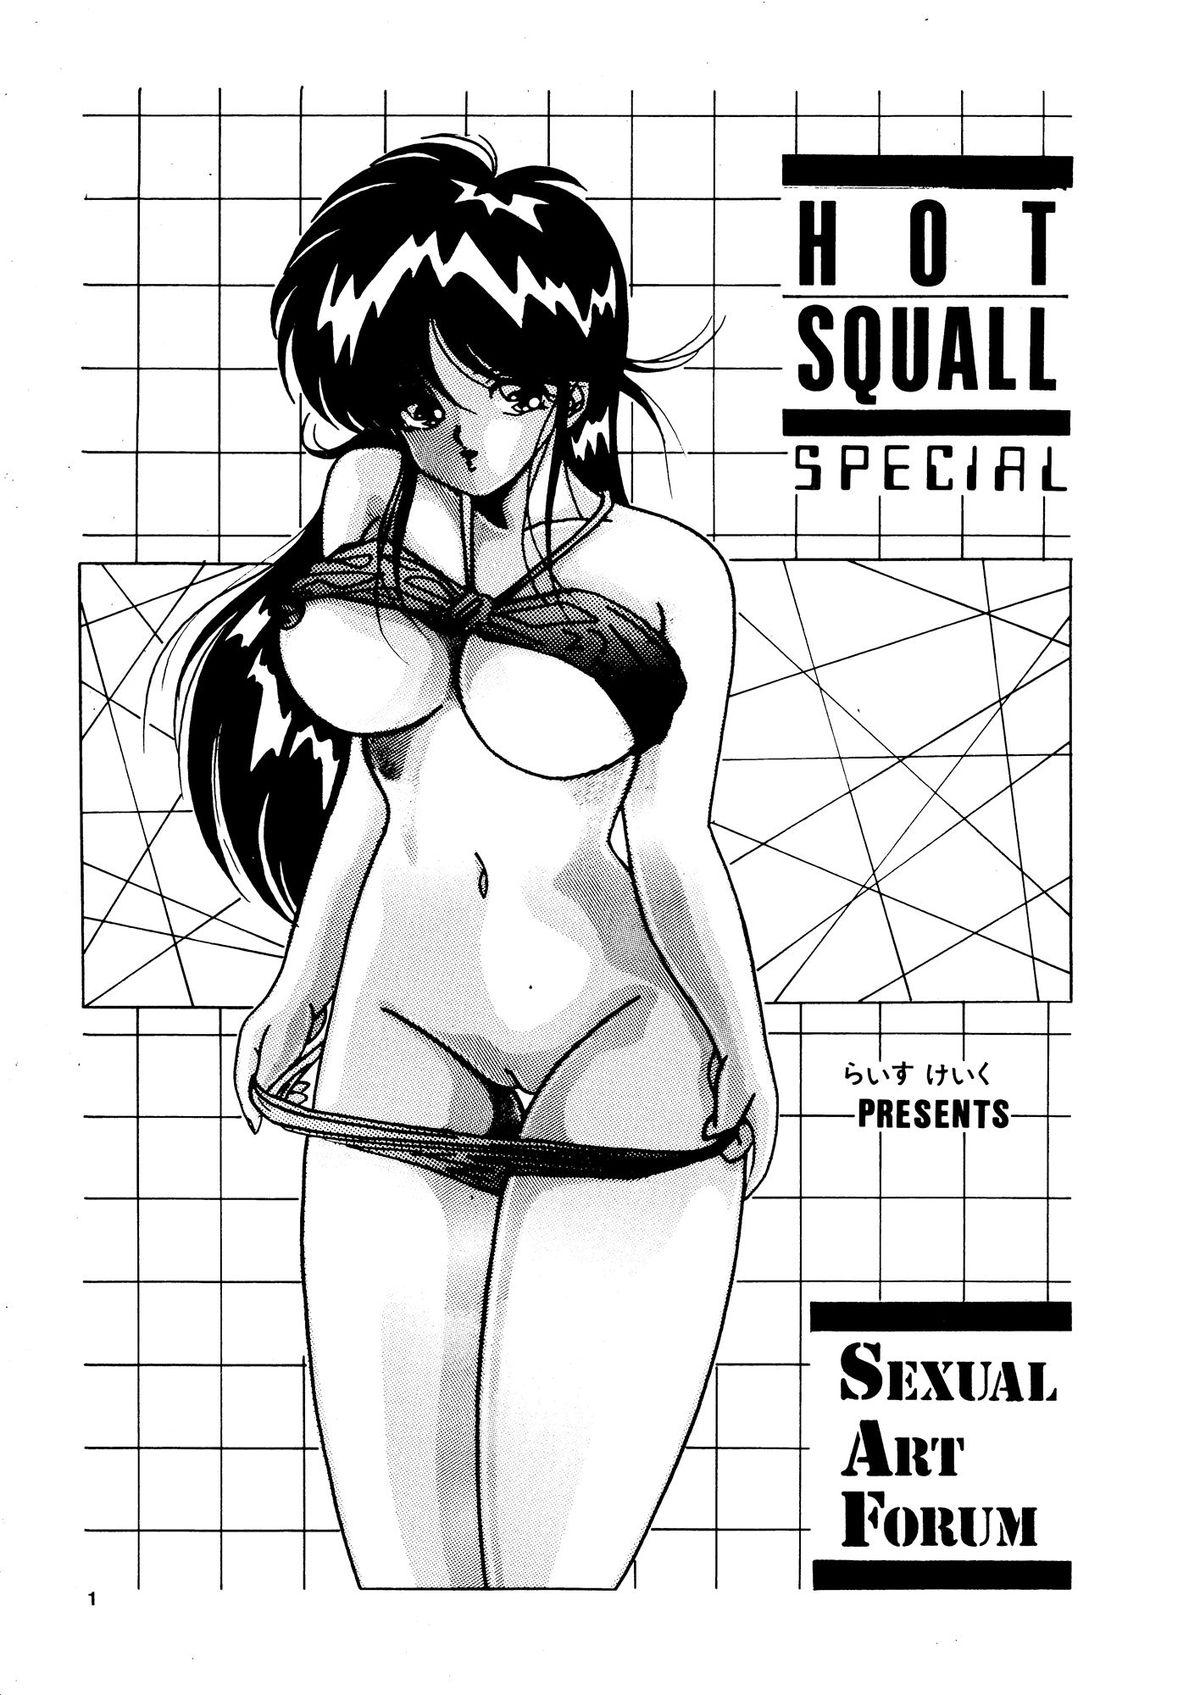 HOT SQUALL 5 2